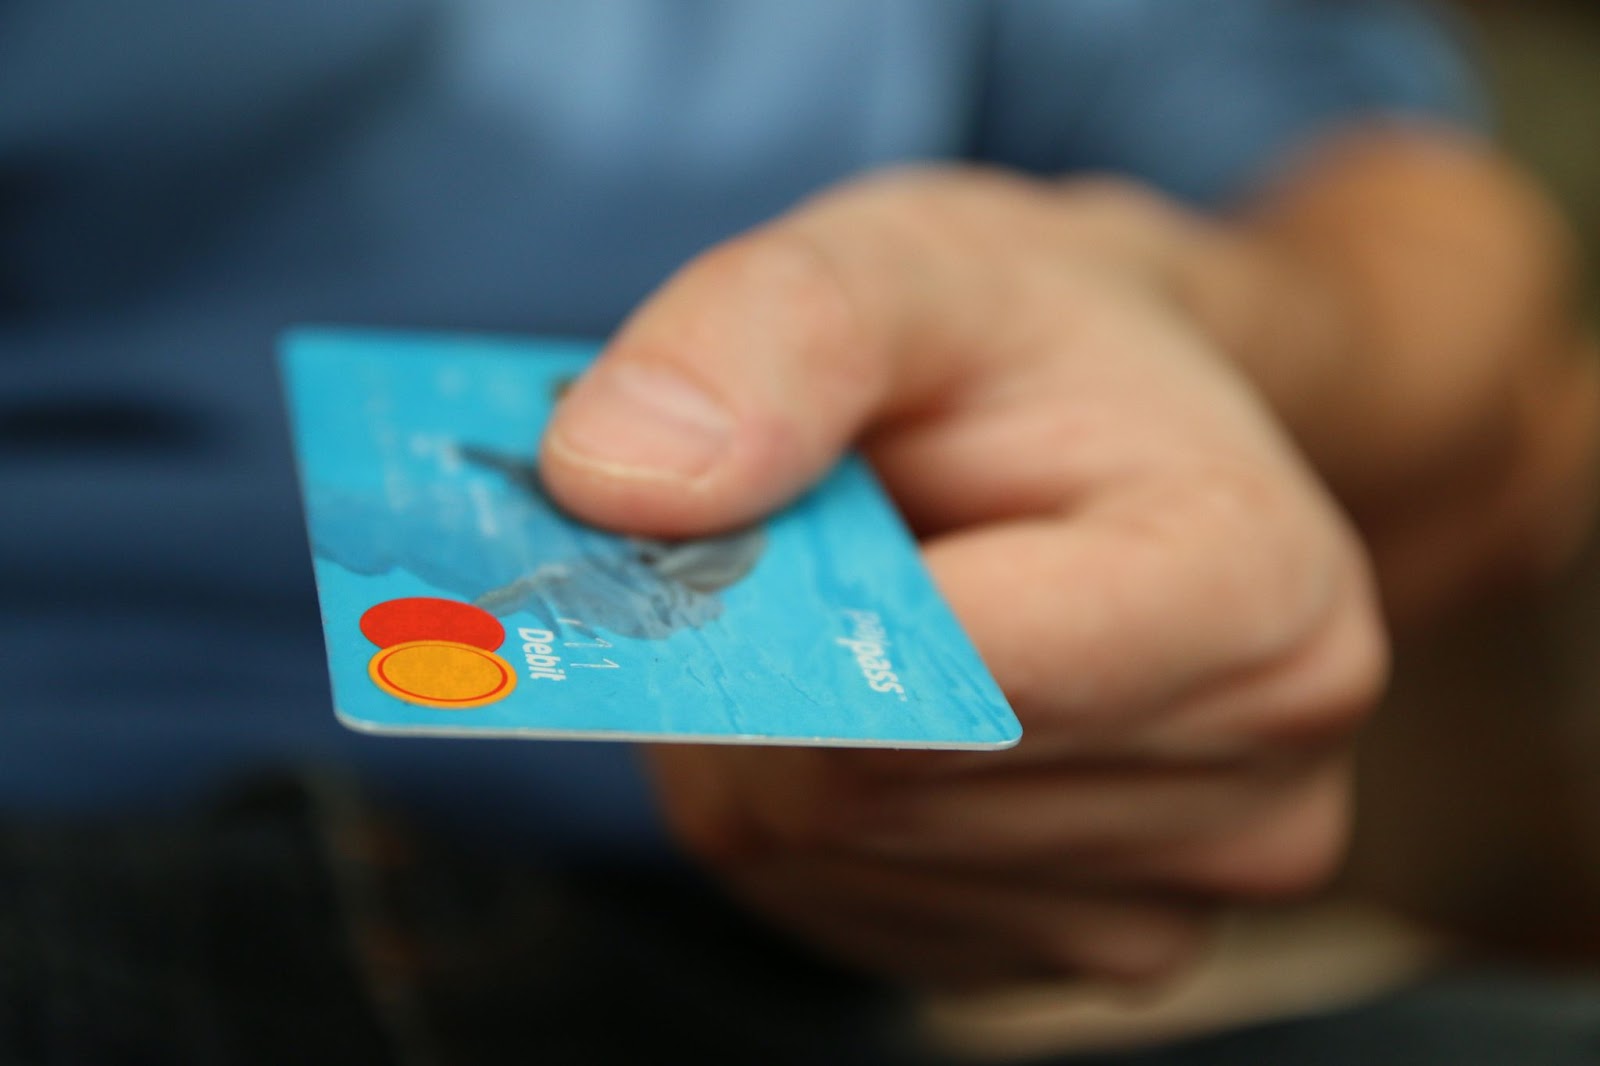 A credit card being handed